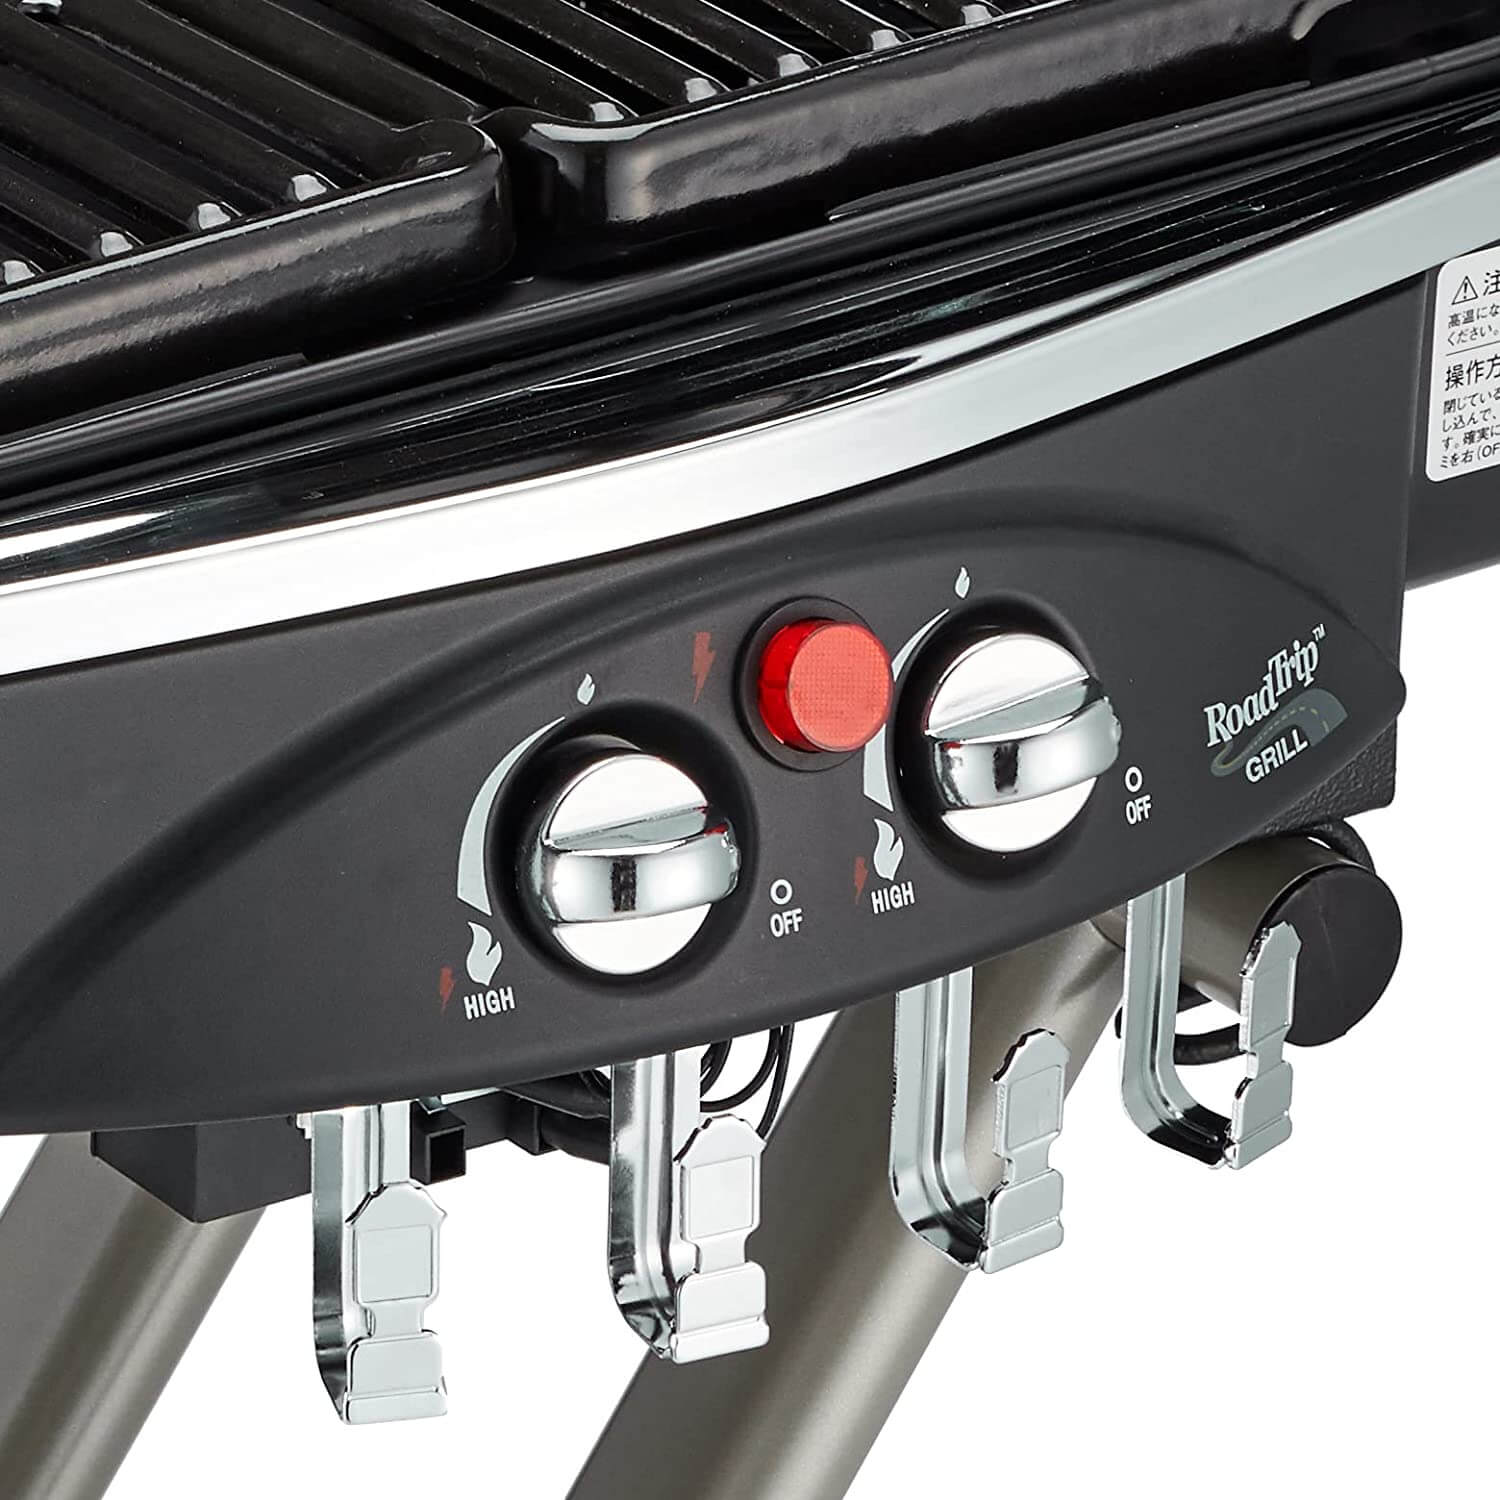 Coleman - Road Trip (R) Grill LXE-J Ⅱ Limited Edition - Black Gray